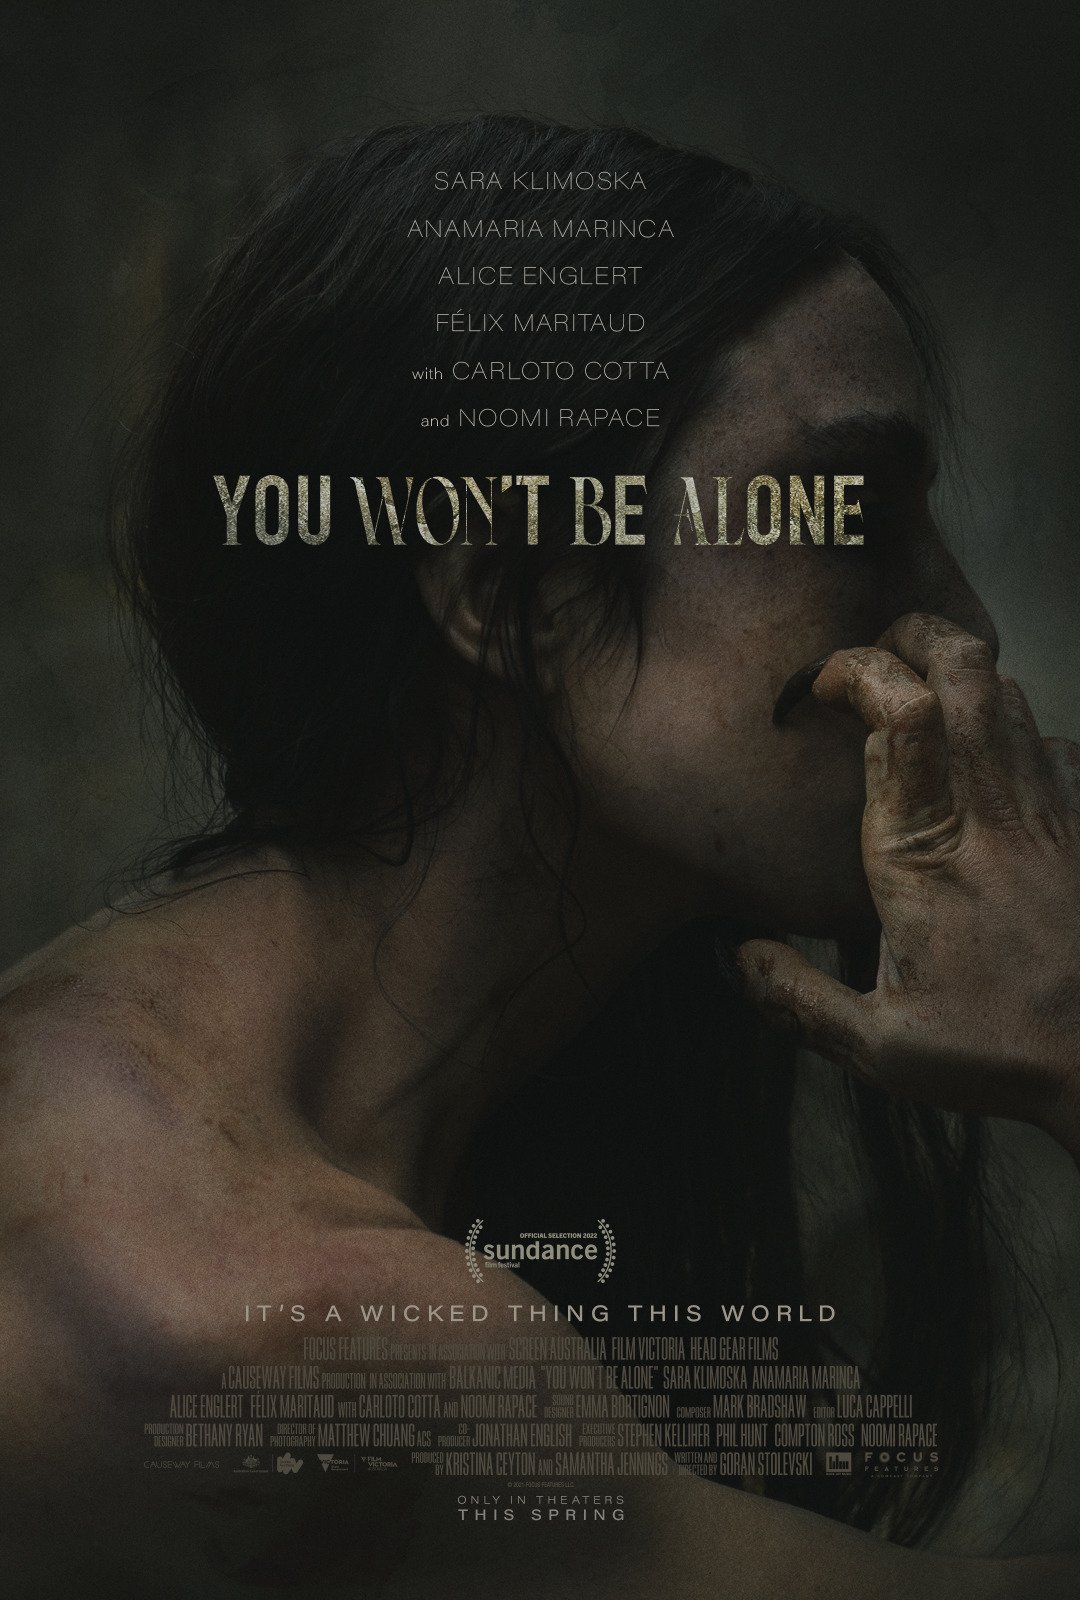 You Won't Be Alone image © Focus Features